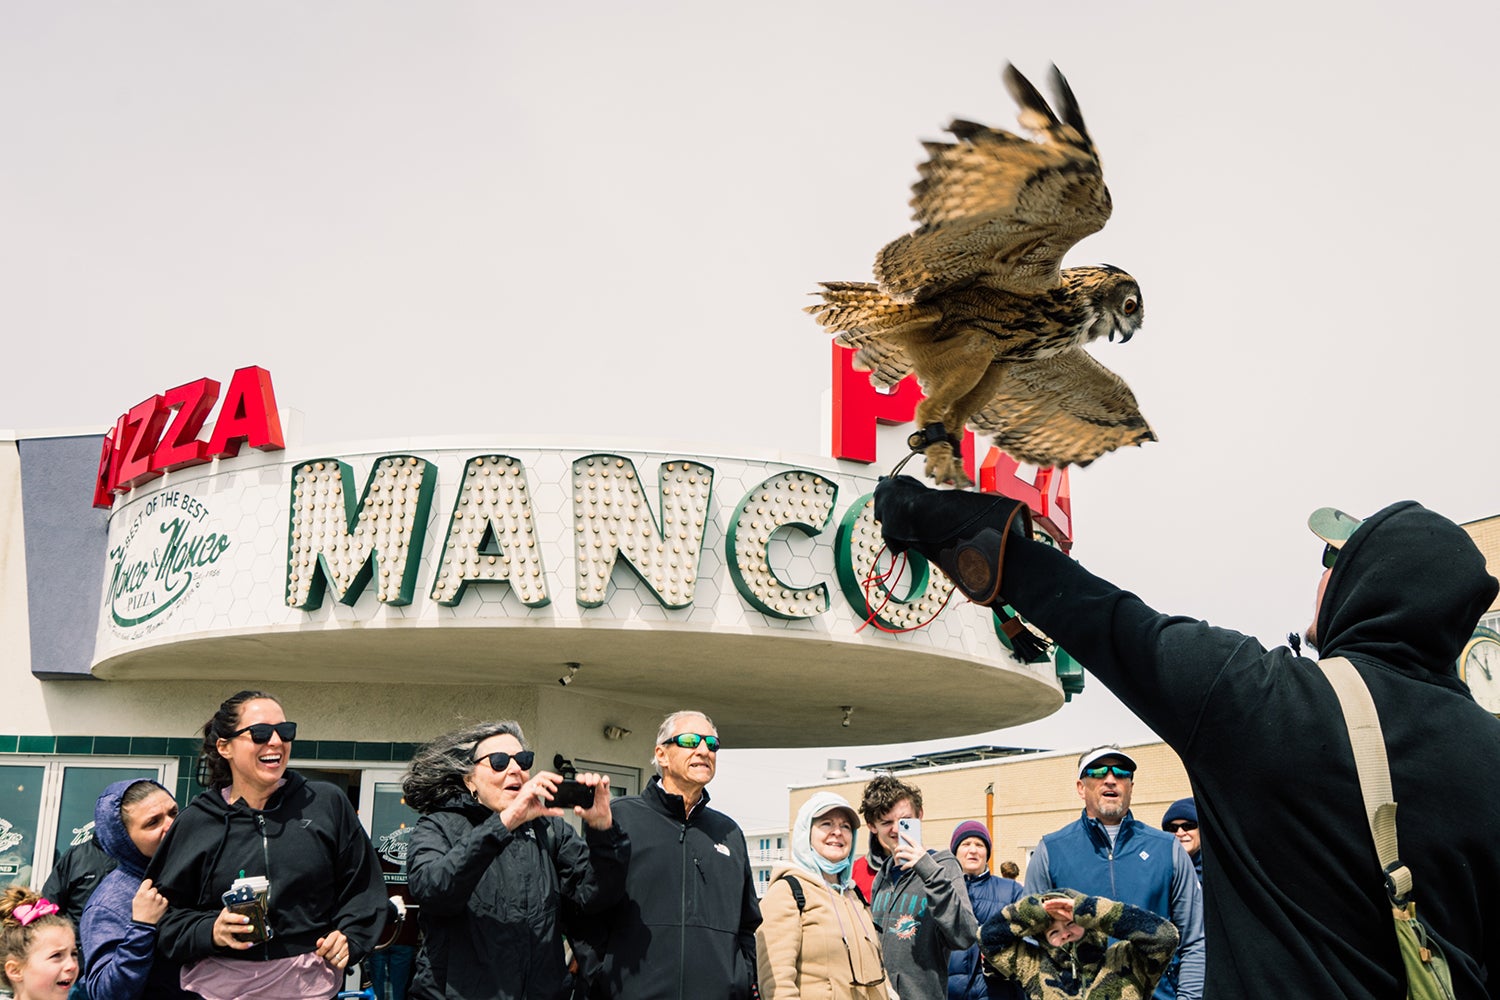 Breaking News eagle-owl on handler's glove spreads wings as onlookers rob photography cease to pizza restaurant